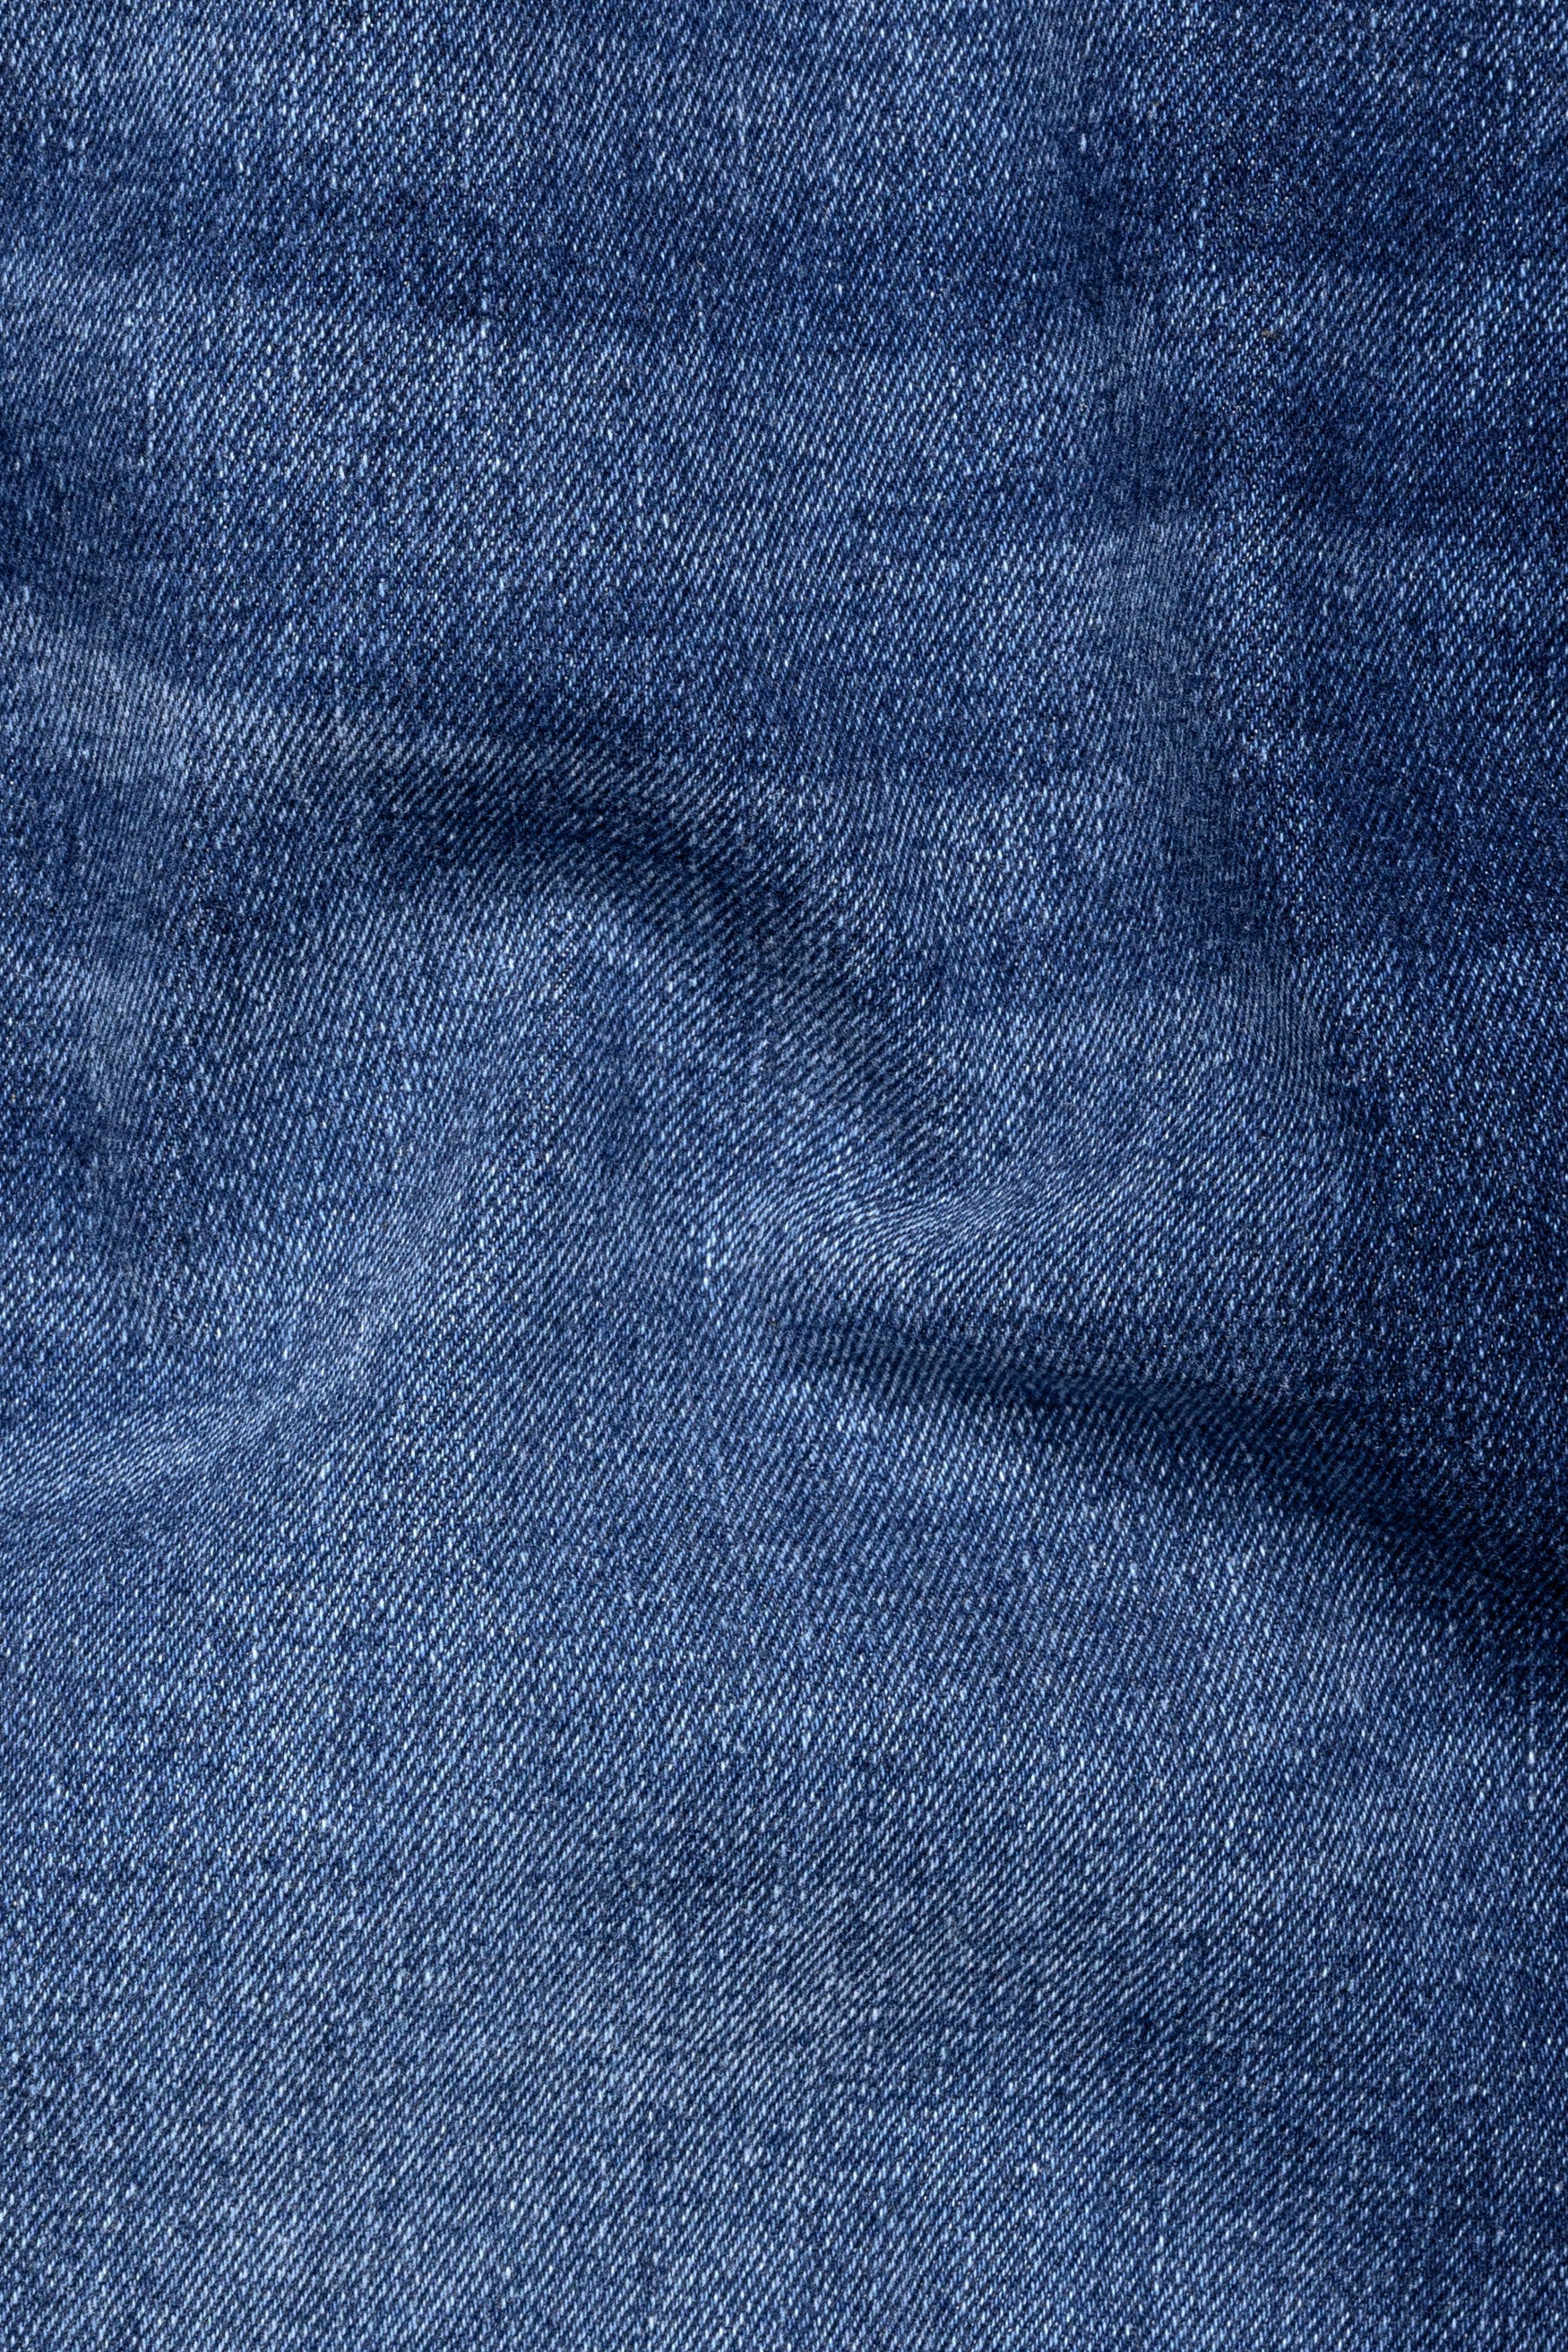 Fiord Blue Whiskering Wash Stretchable Denim